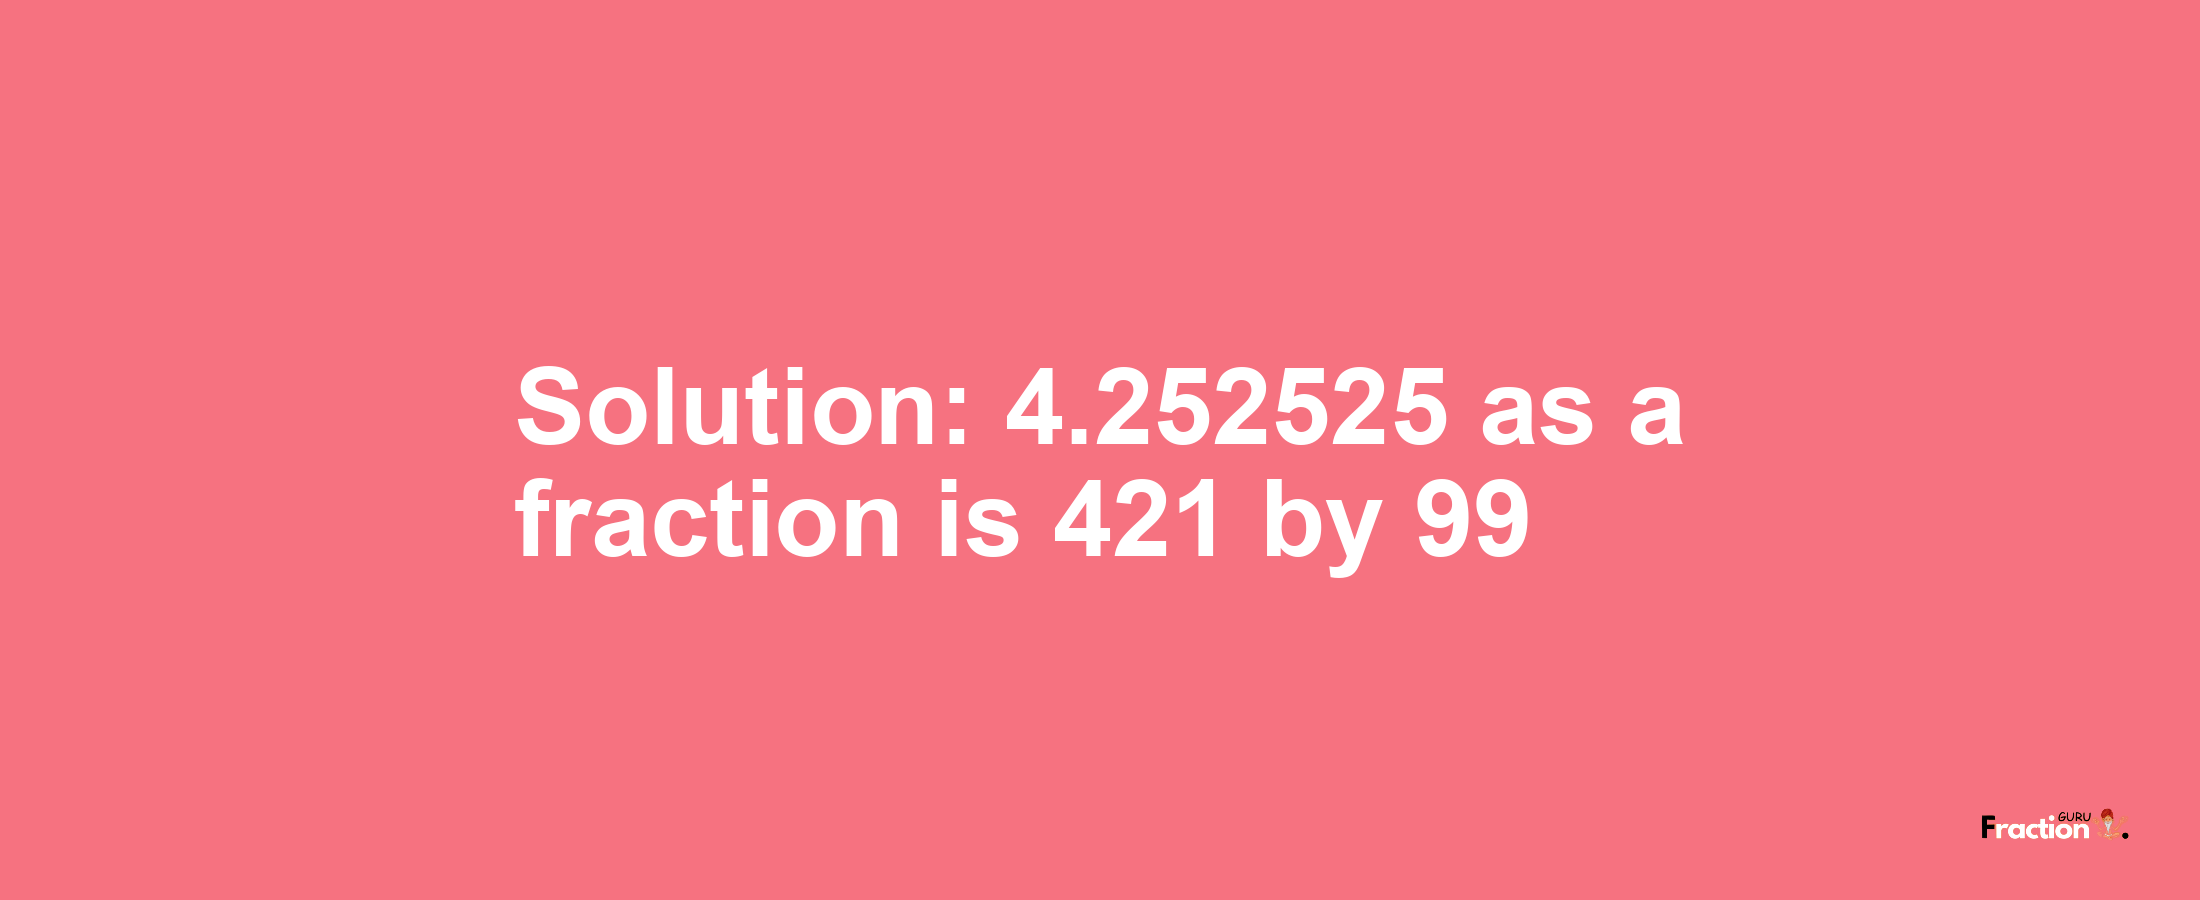 Solution:4.252525 as a fraction is 421/99